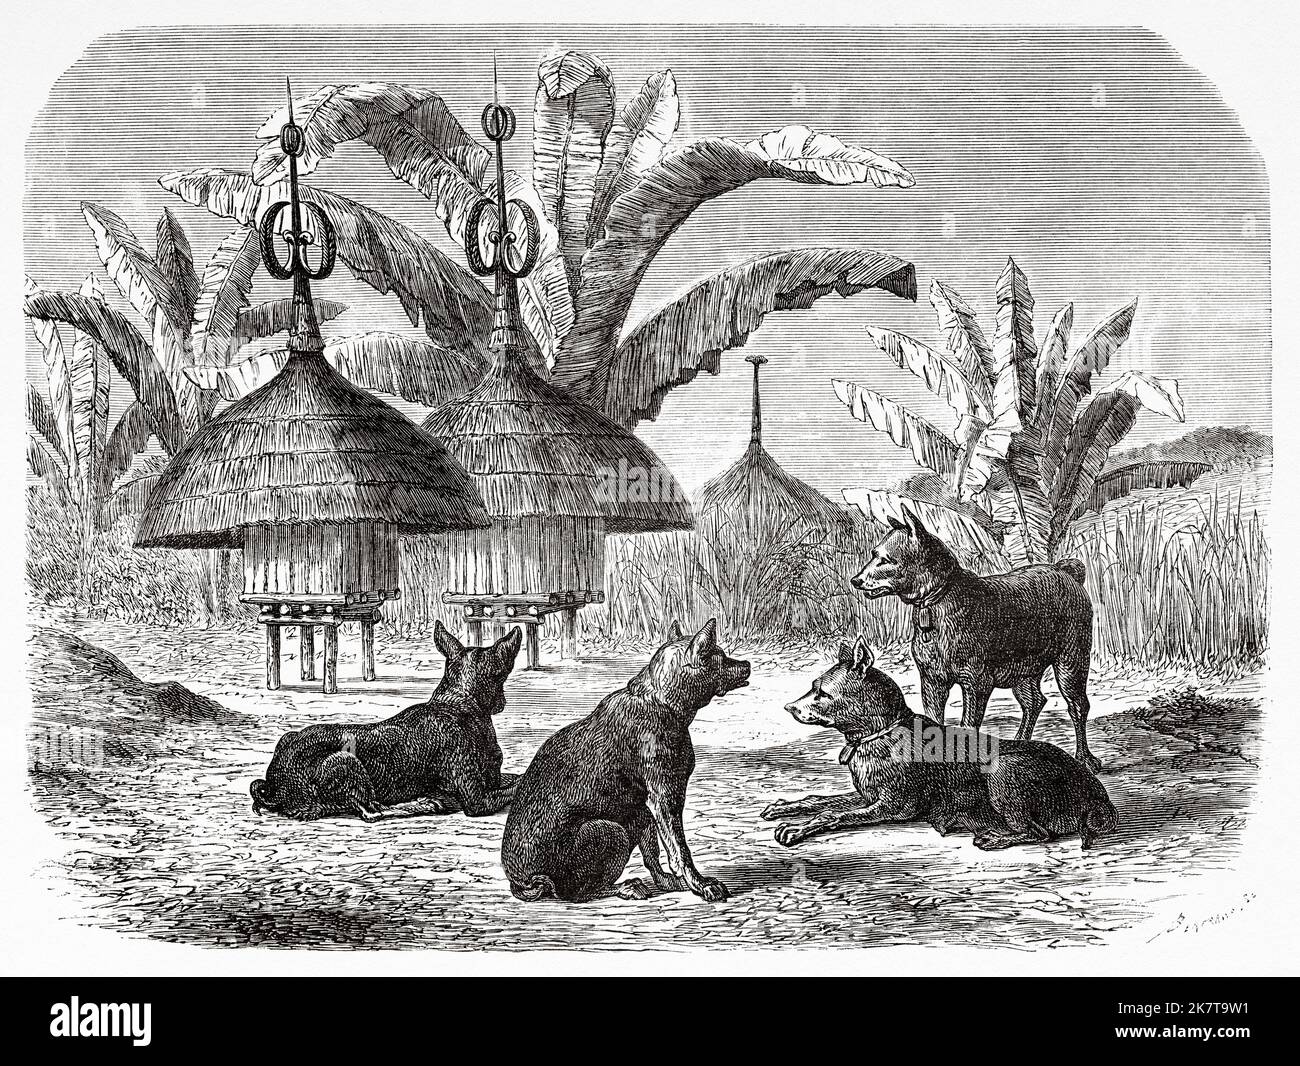 Dogs and barns on stilts of the Azande people, Democratic Republic of the Congo. Africa. Heart of Africa Three years travels and adventures in the unexplored regions of Central Africa by Georg August Schweinfurth, 1868-1871 Stock Photo